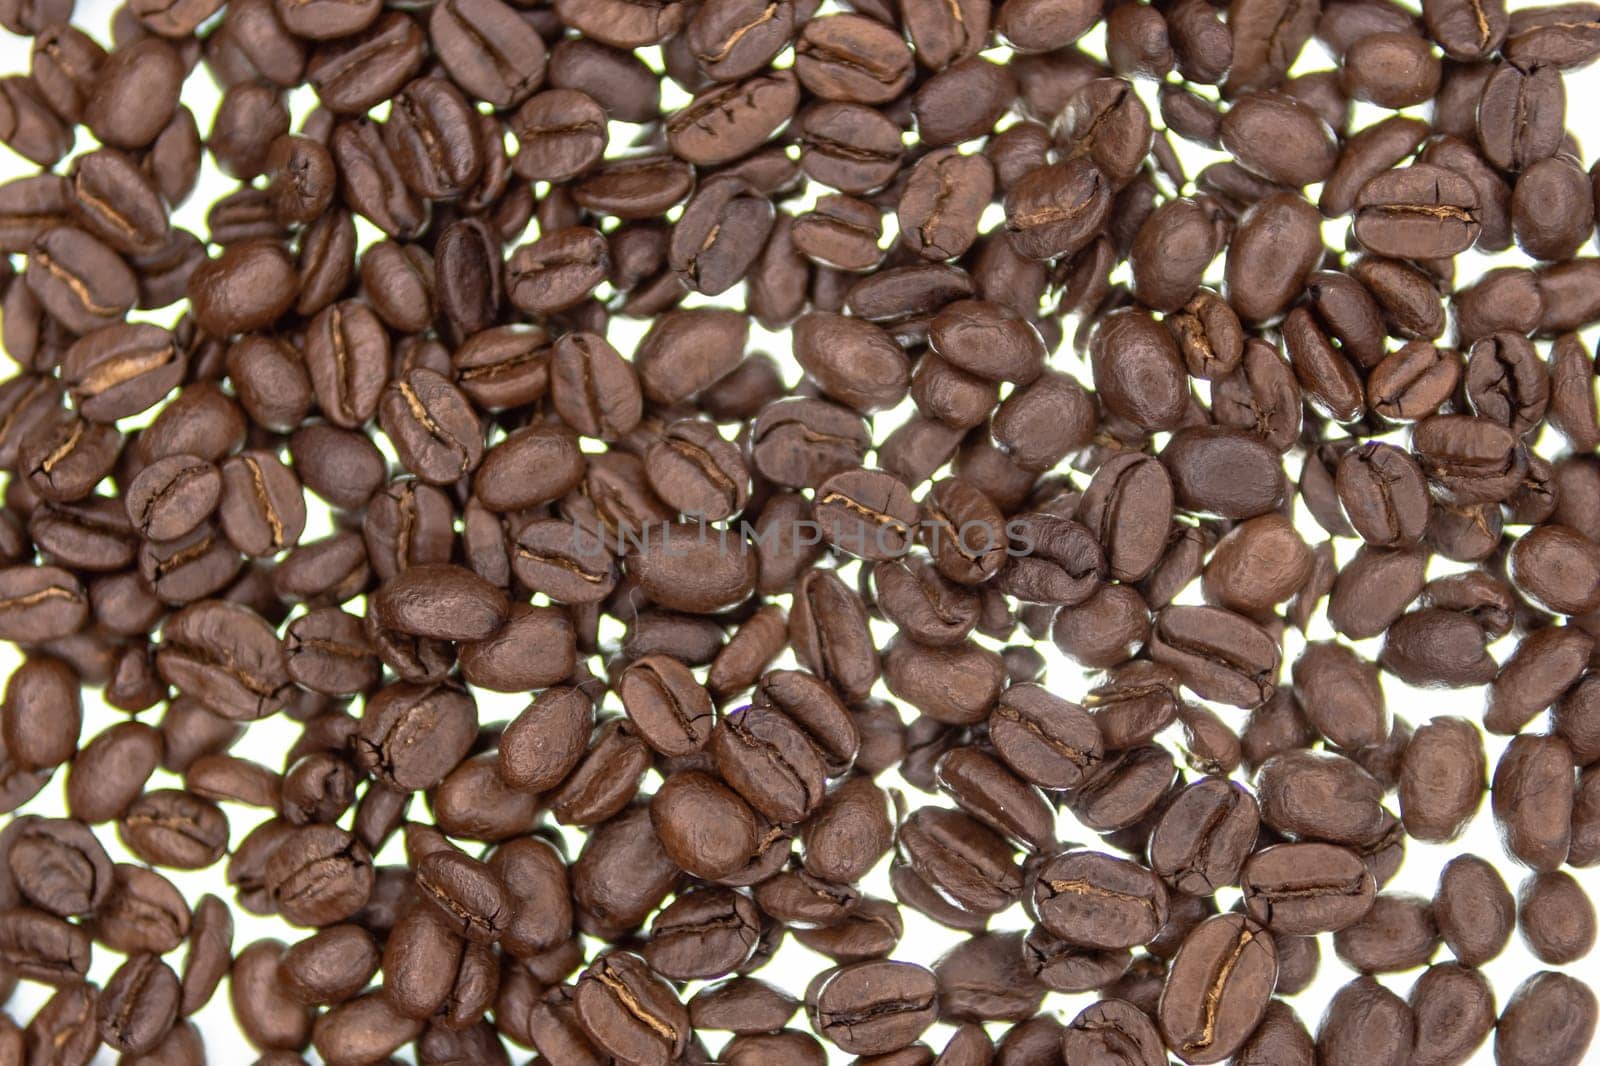 Roasted coffee beans background.Roasted coffee beans on a light background. High quality photo